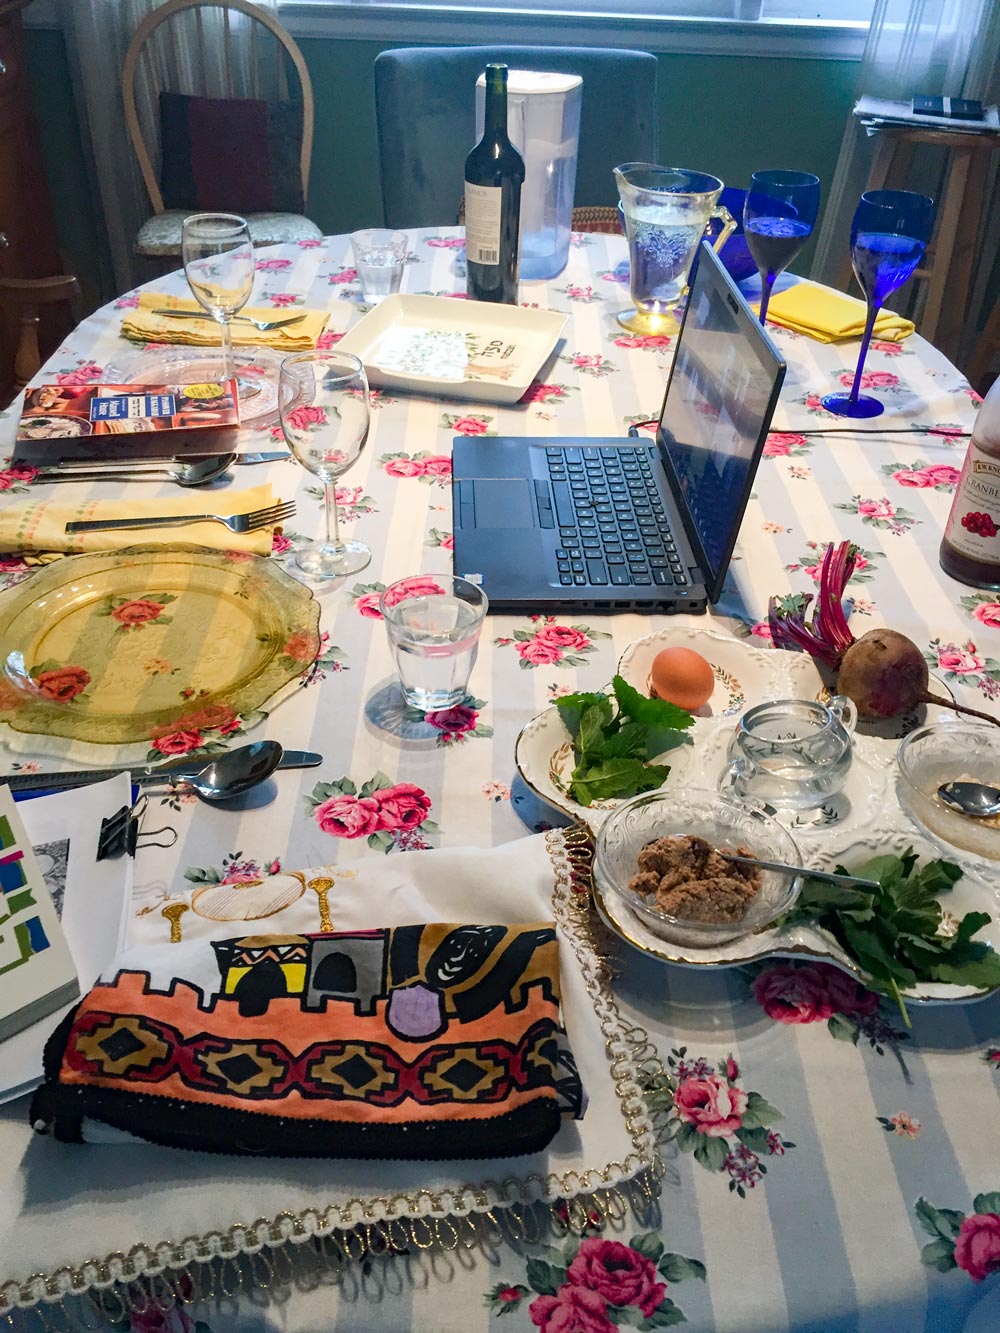 Laptop sitting on table with various food and dishes surrounding it